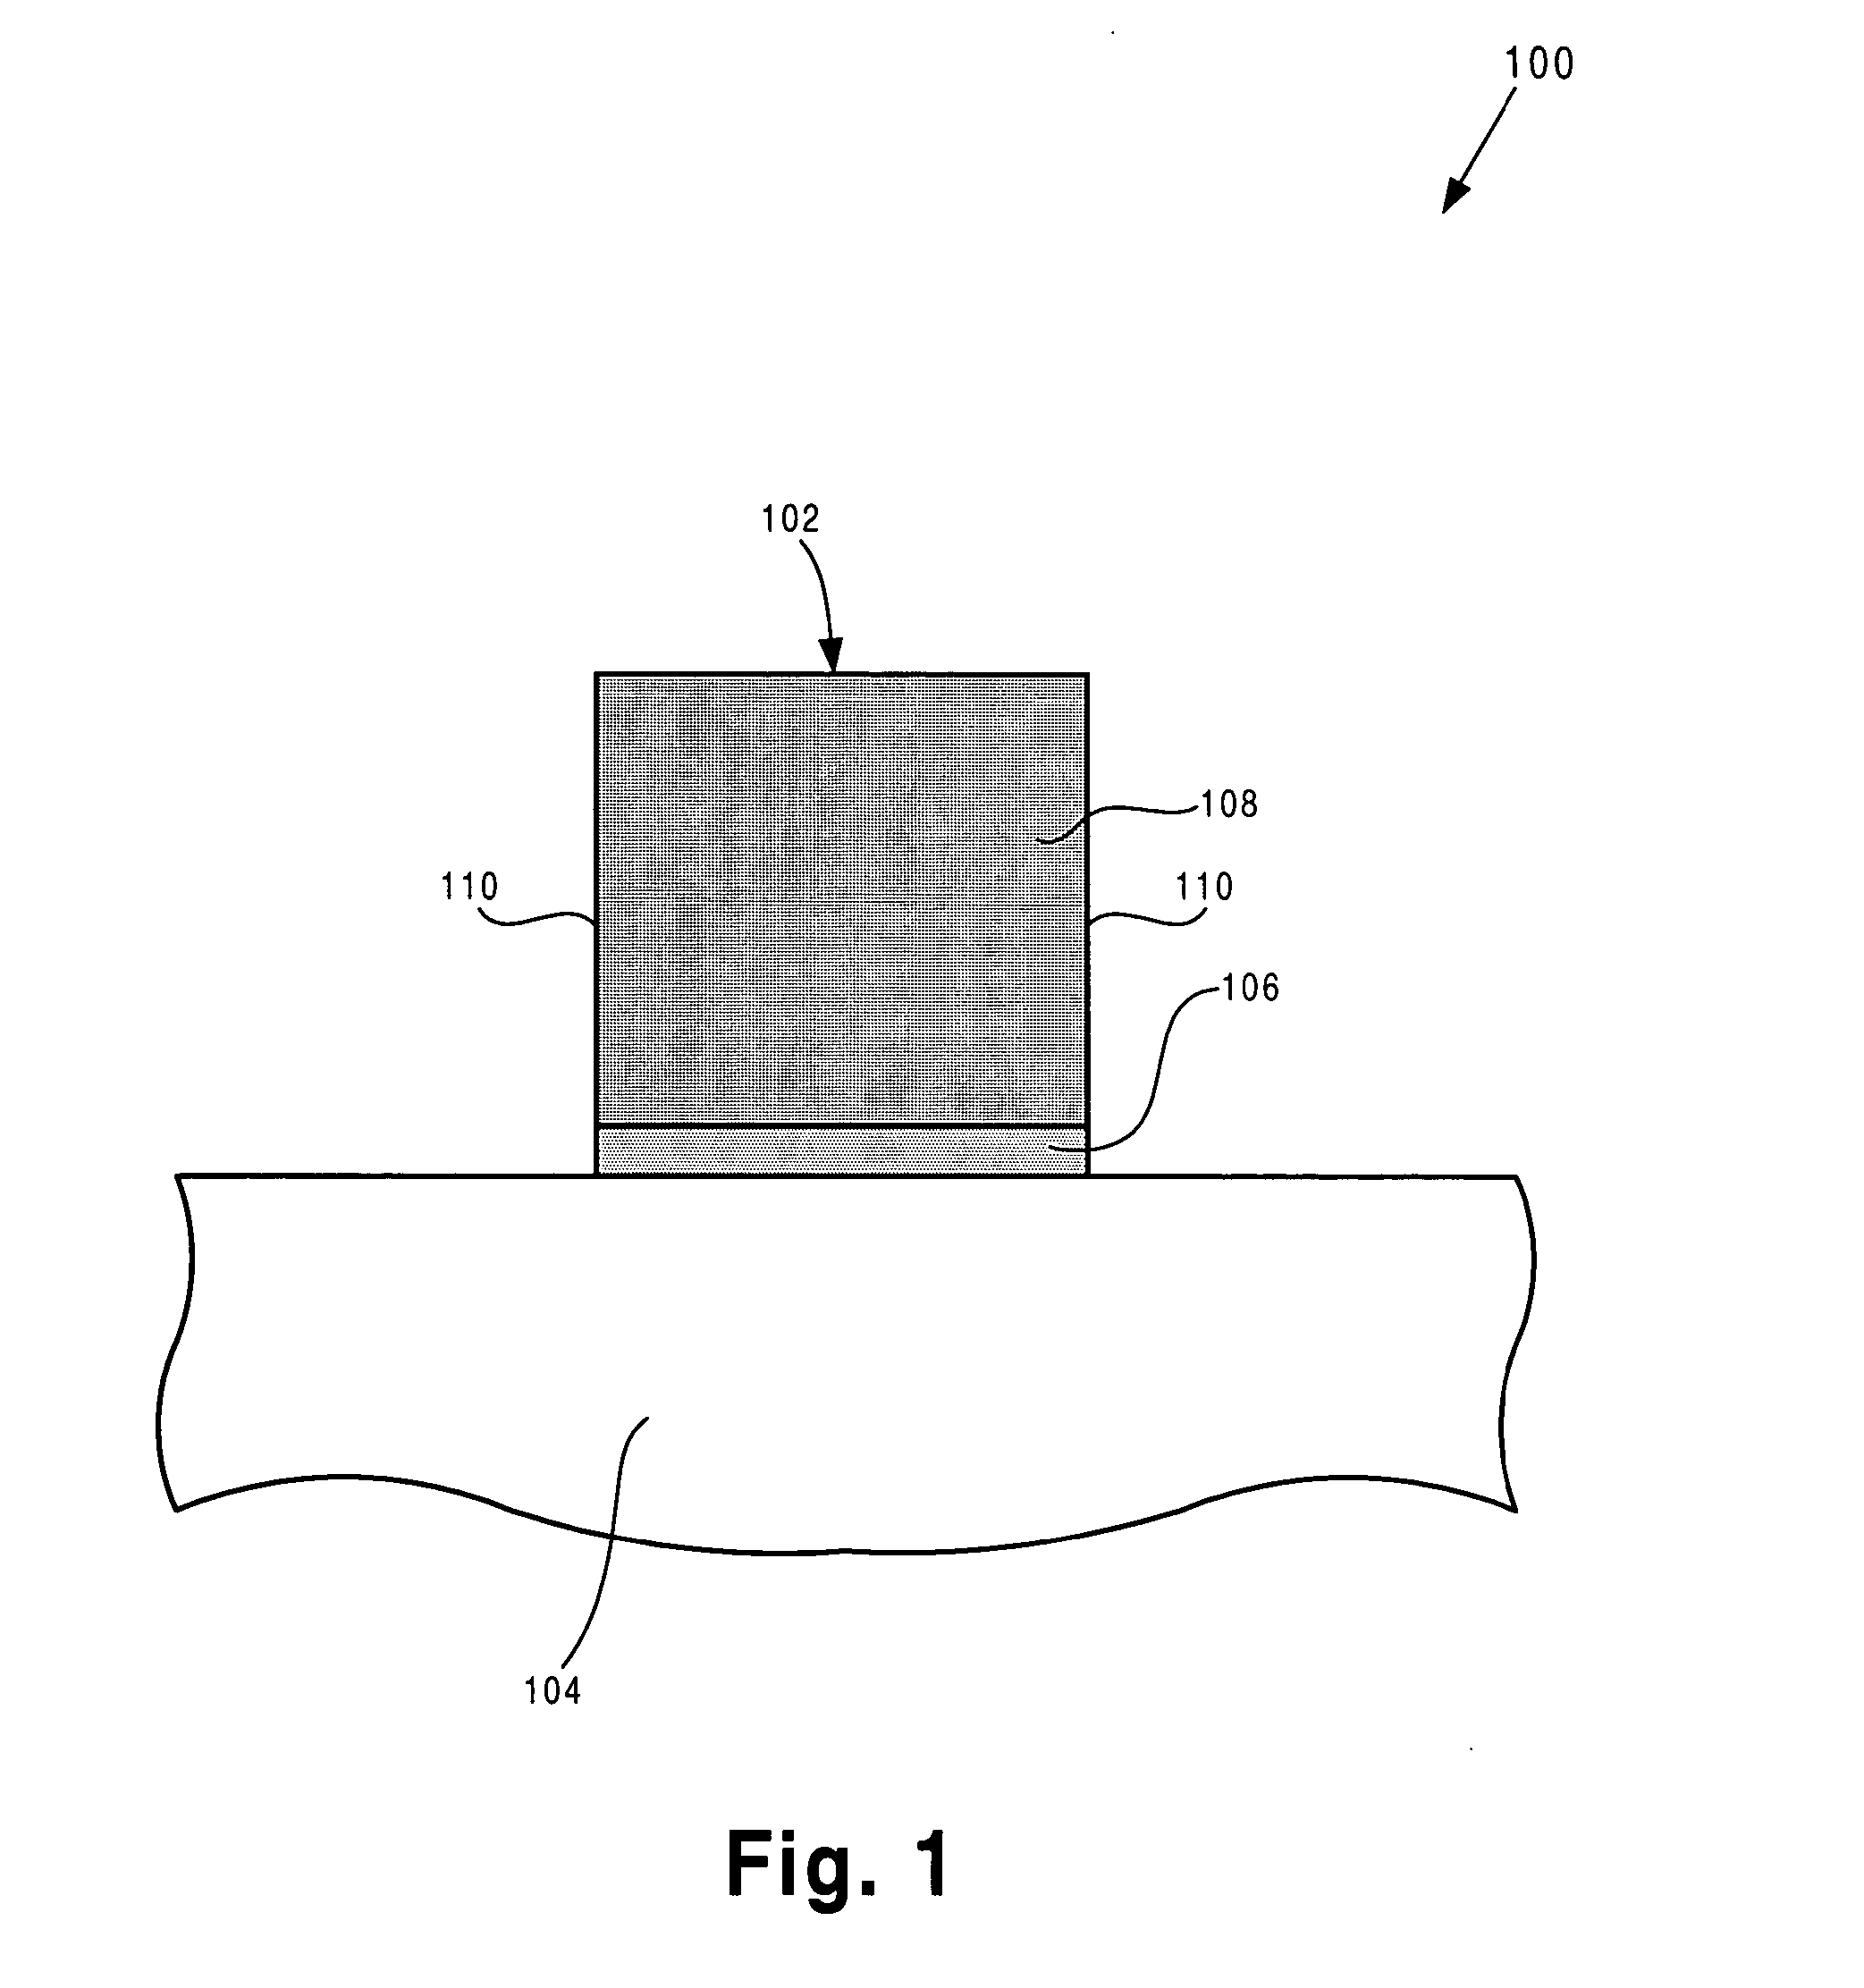 Method for integrating a high-k gate dielectric in a transistor fabrication process